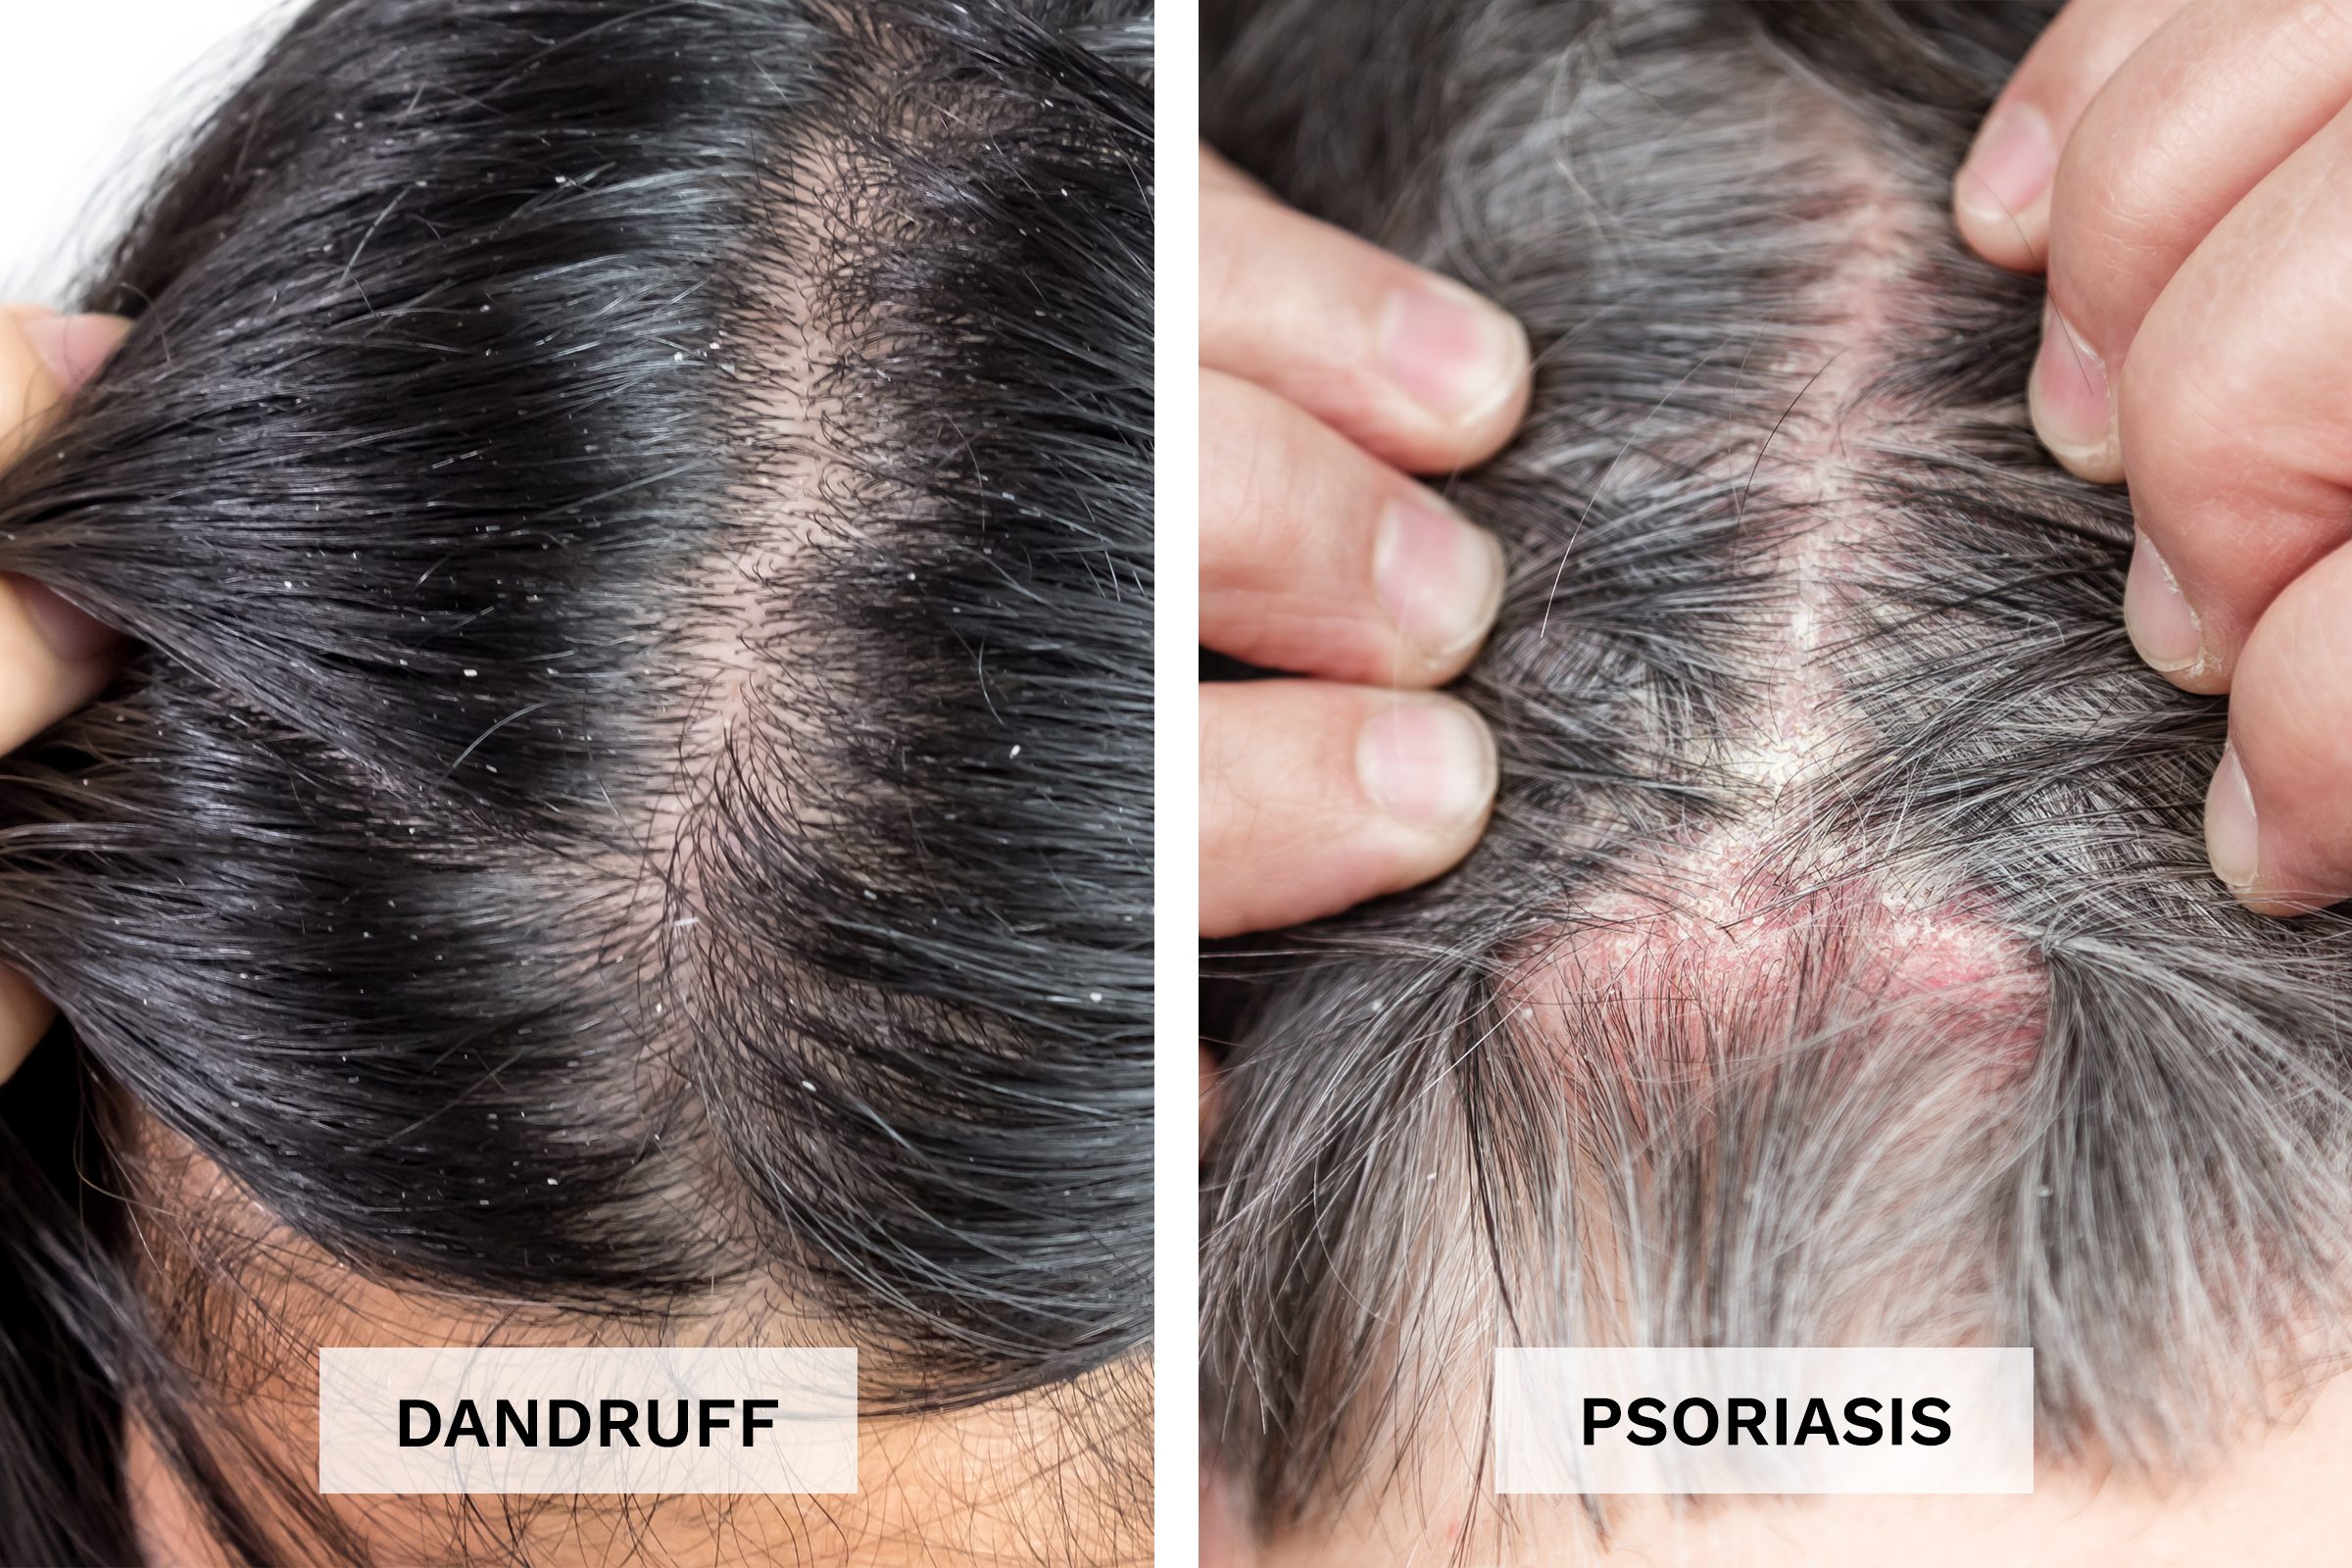 Scalp Psoriasis Vs Dandruff Whats Causing Your Flakes The Healthy